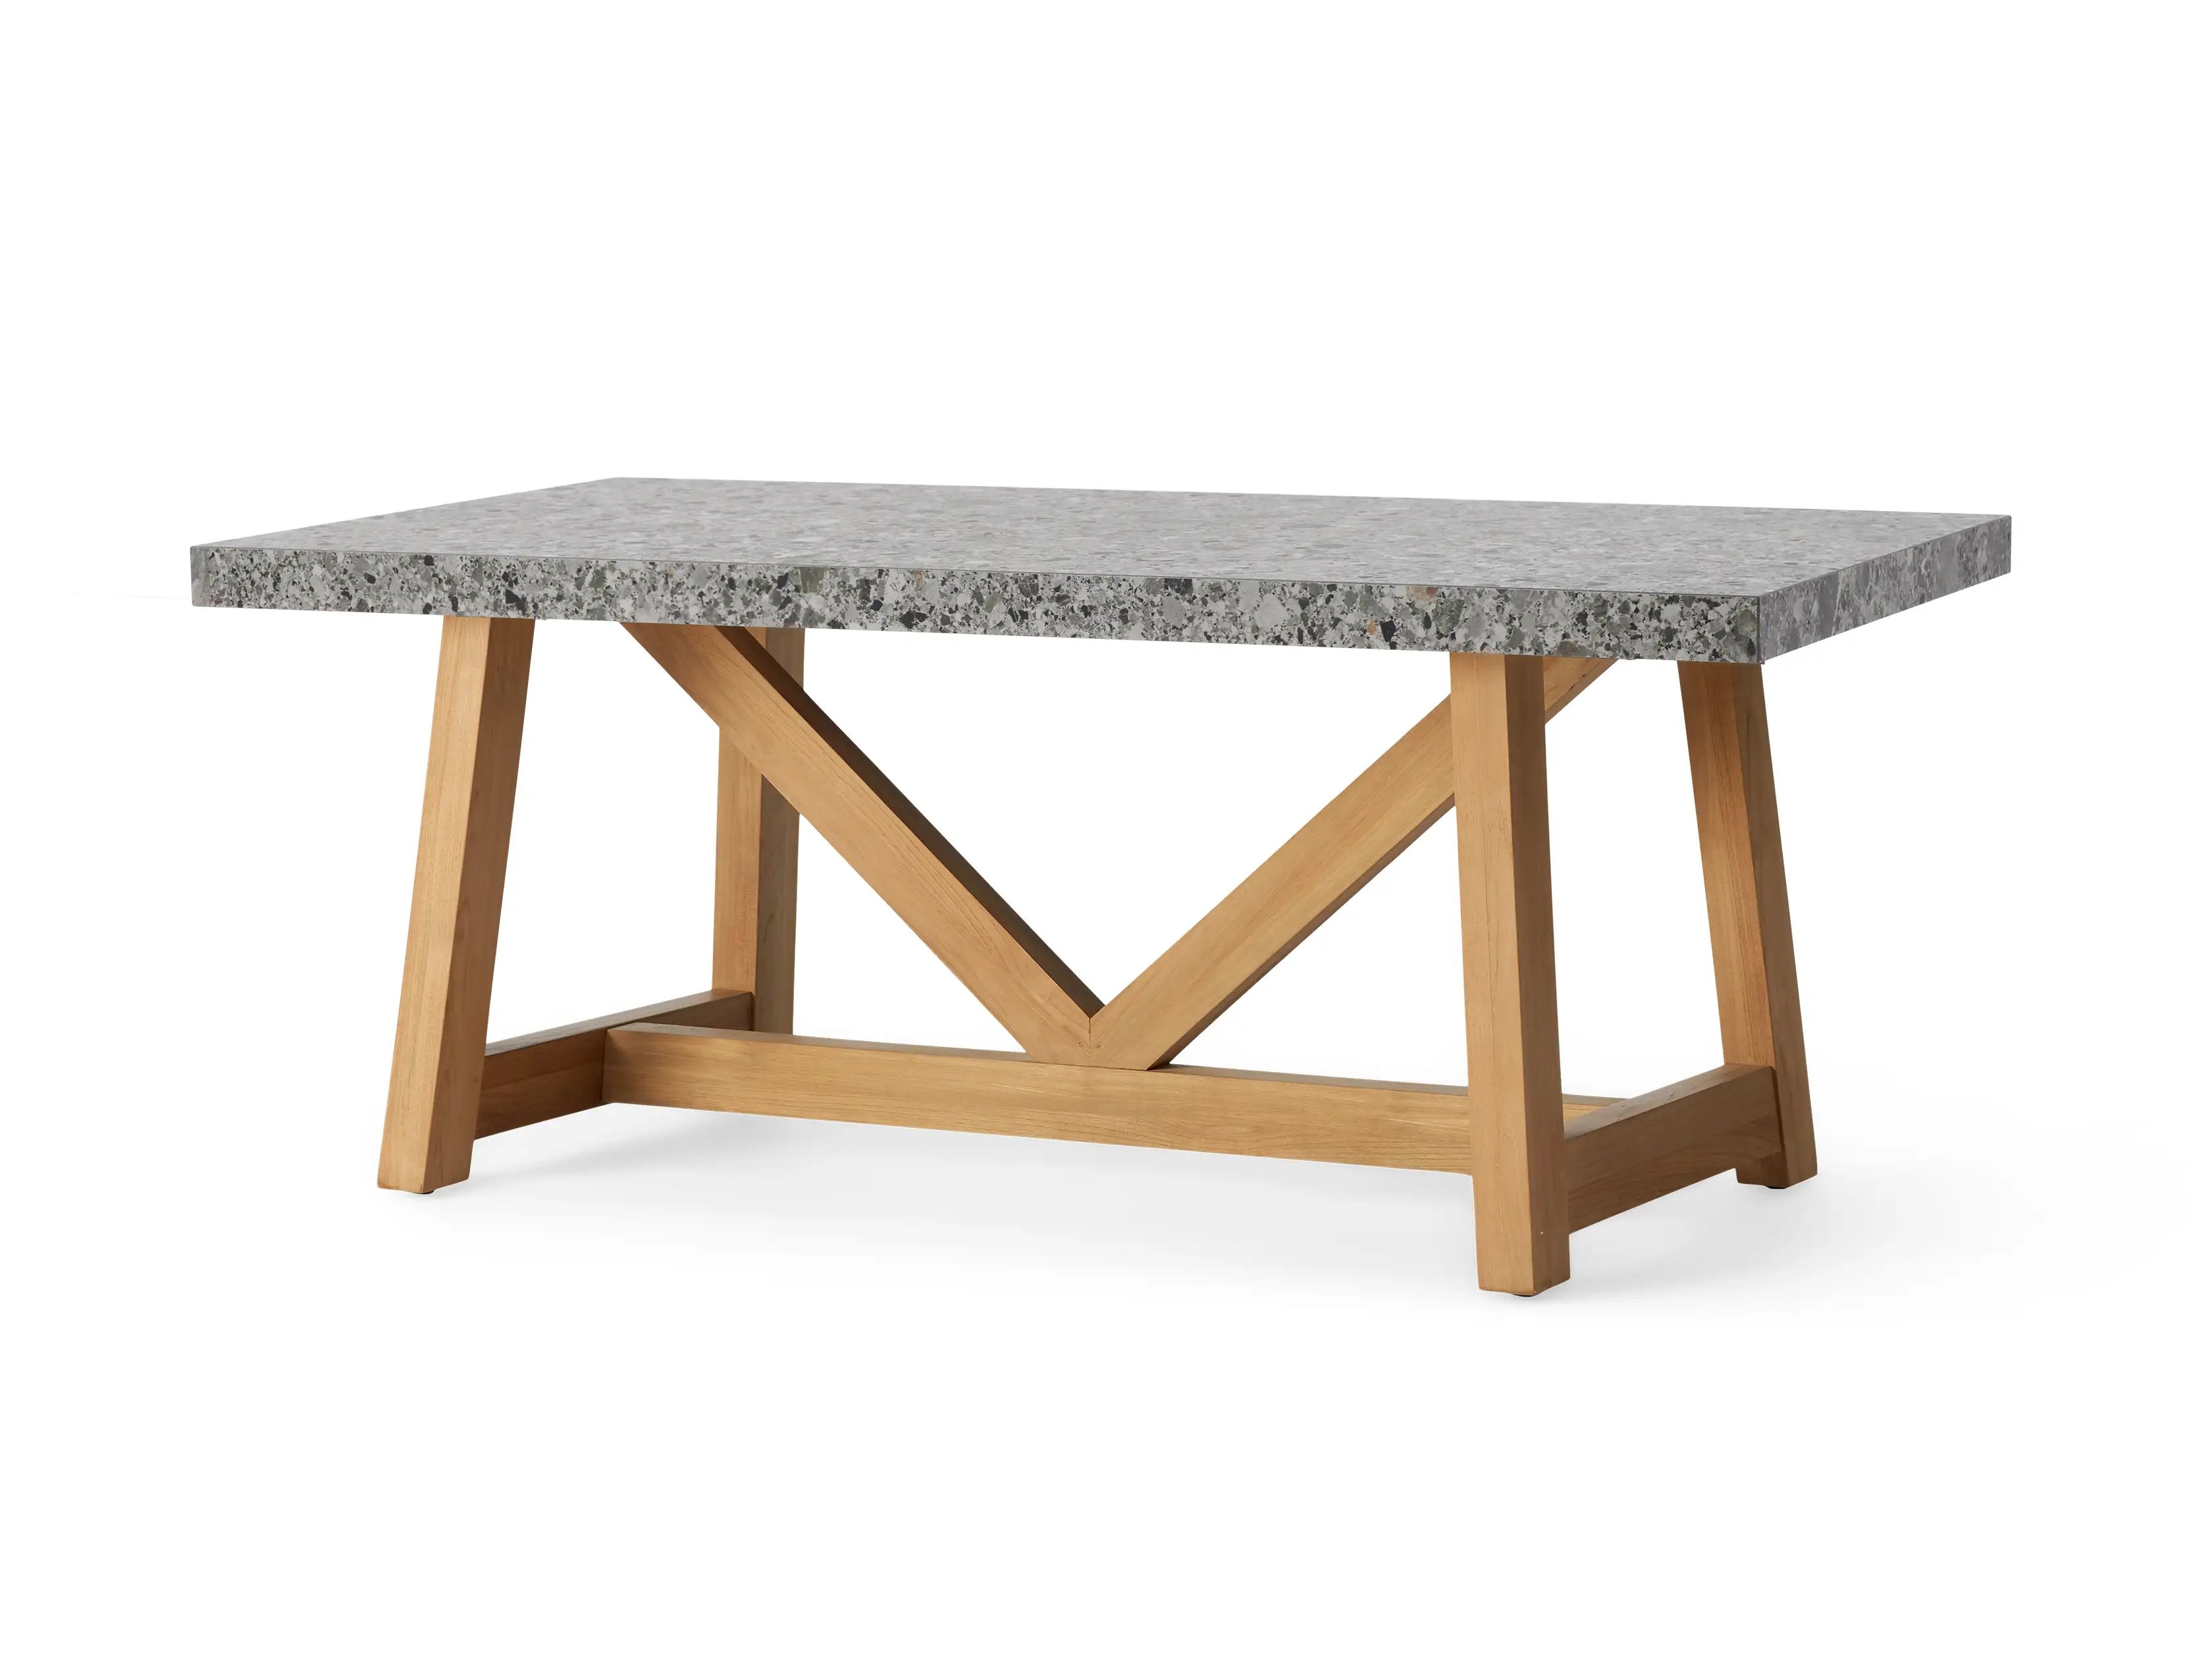 Outdoor Rectangular Dining Table with French Beam Base | Arhaus